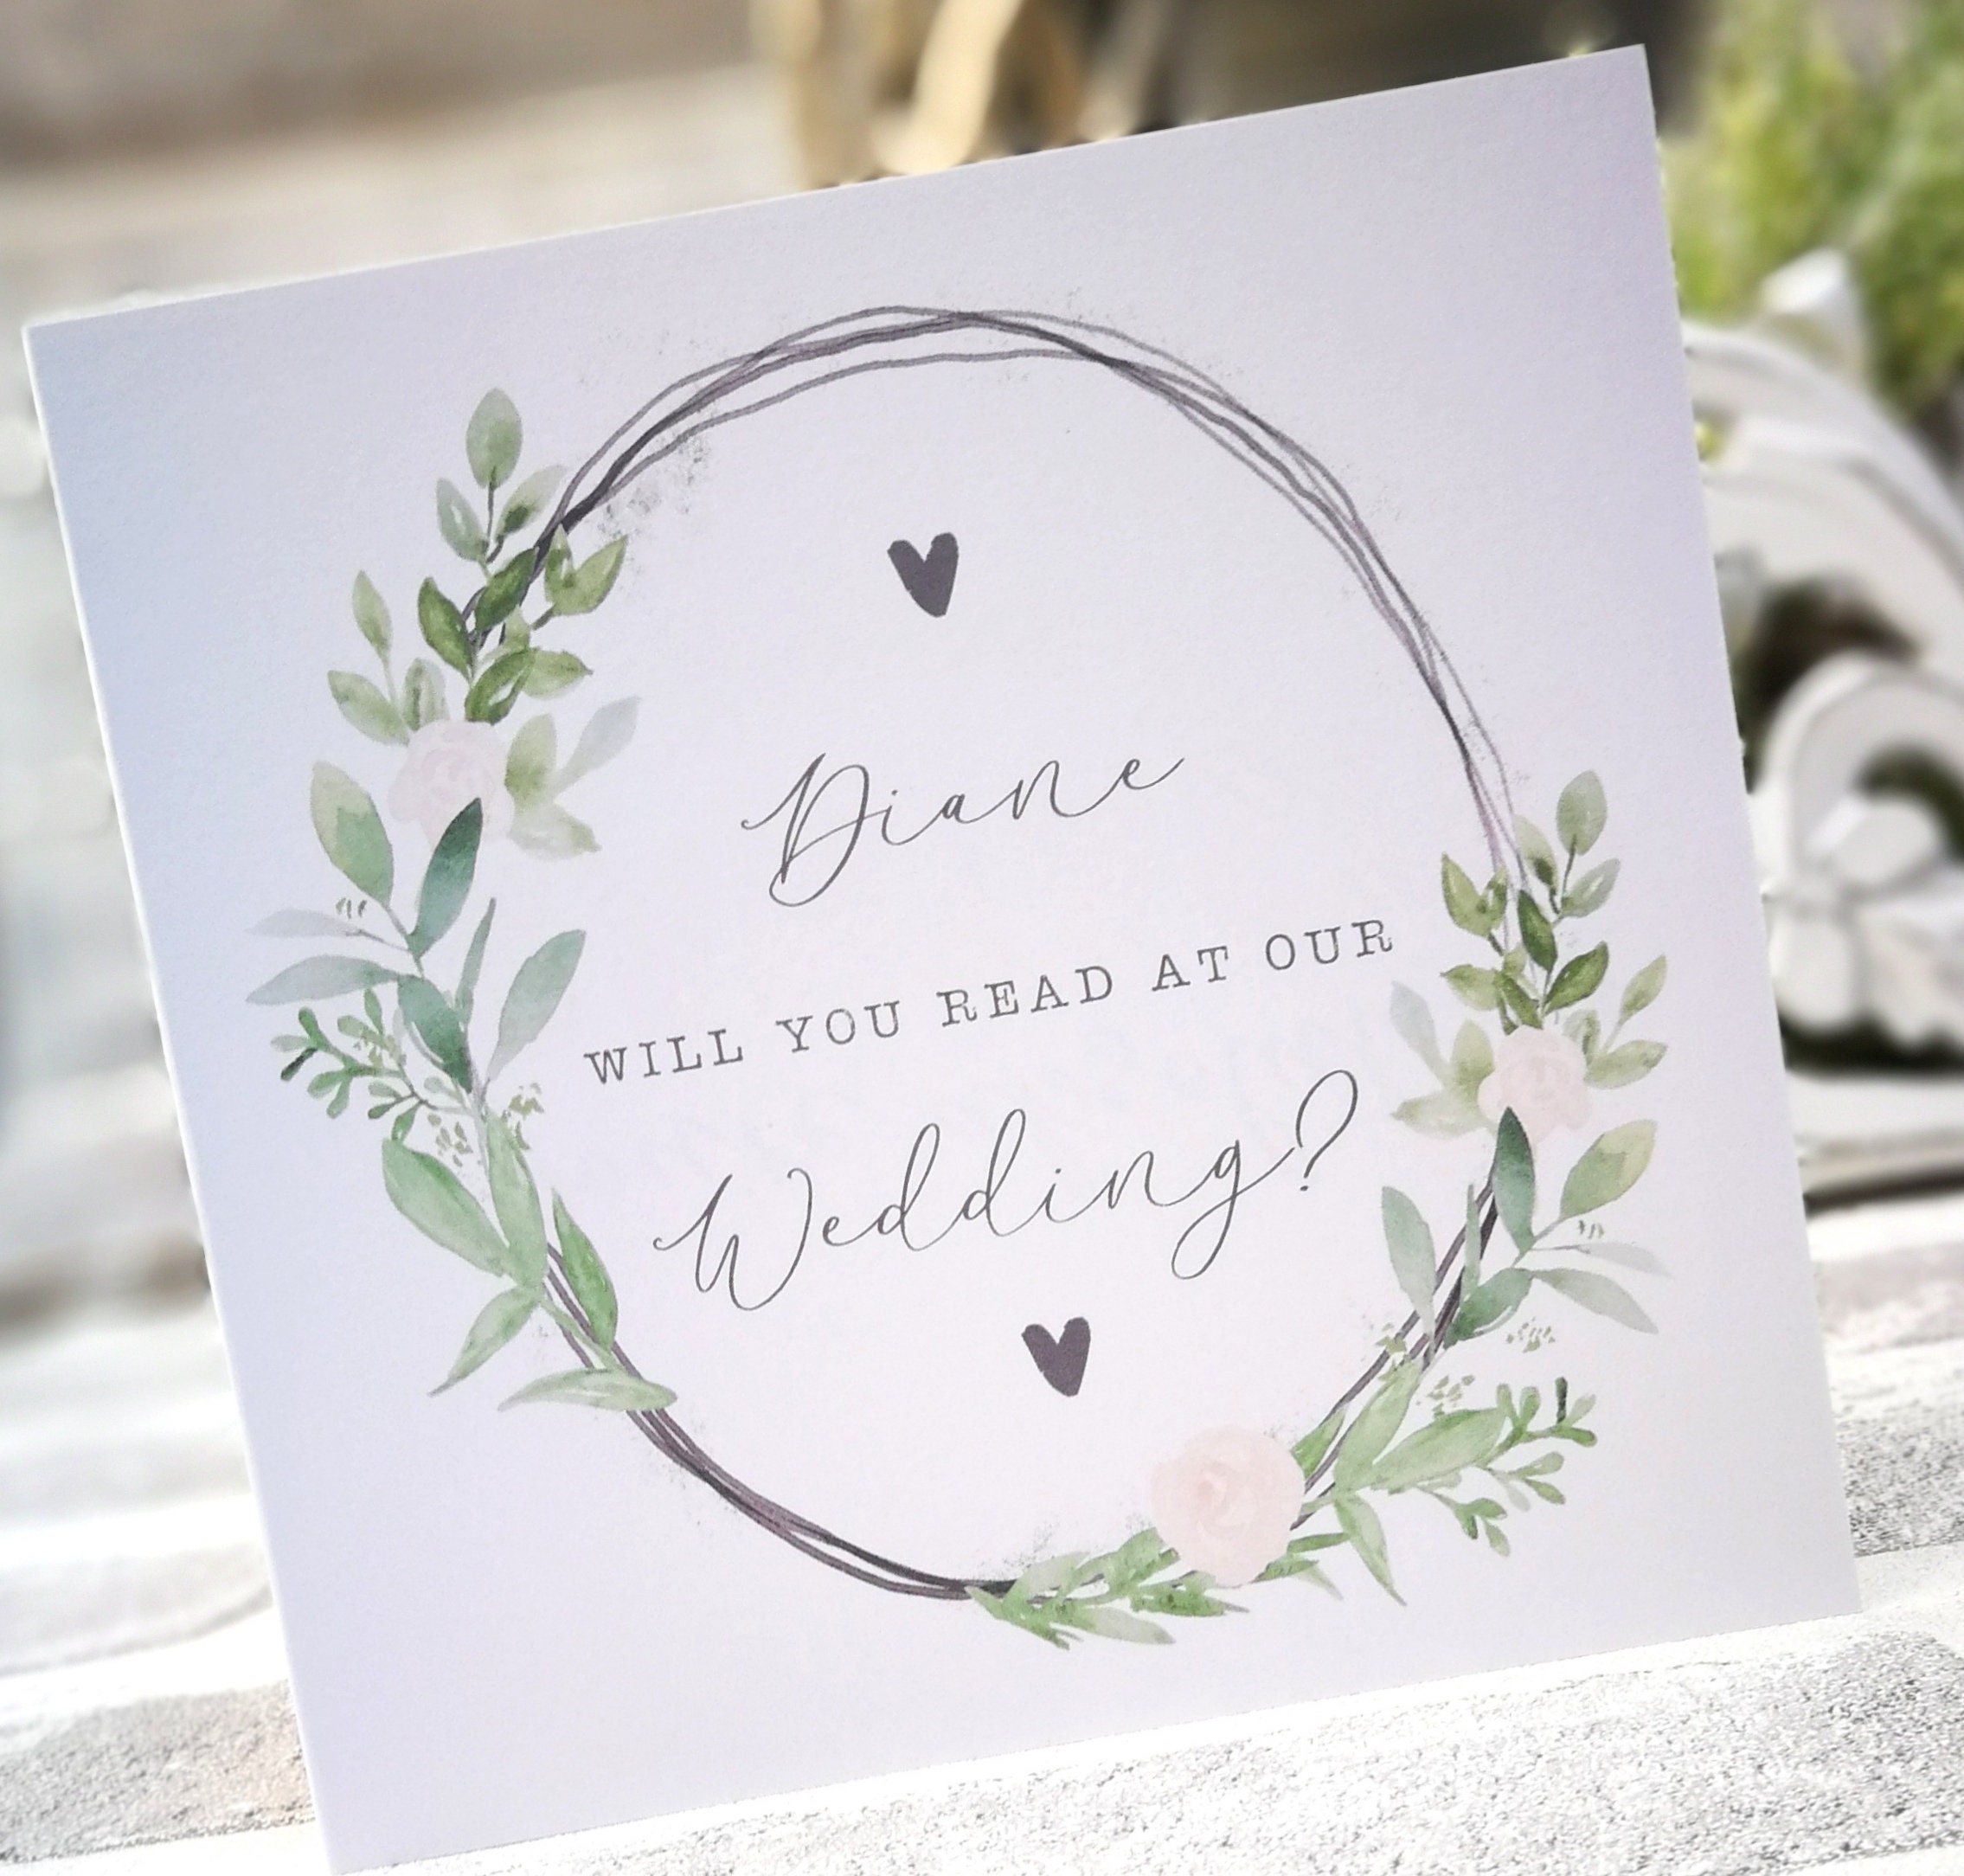 Personalised Will You Read At Our Wedding/Be Reader Card. Rustic, Greenery, Botanical, Country Floral